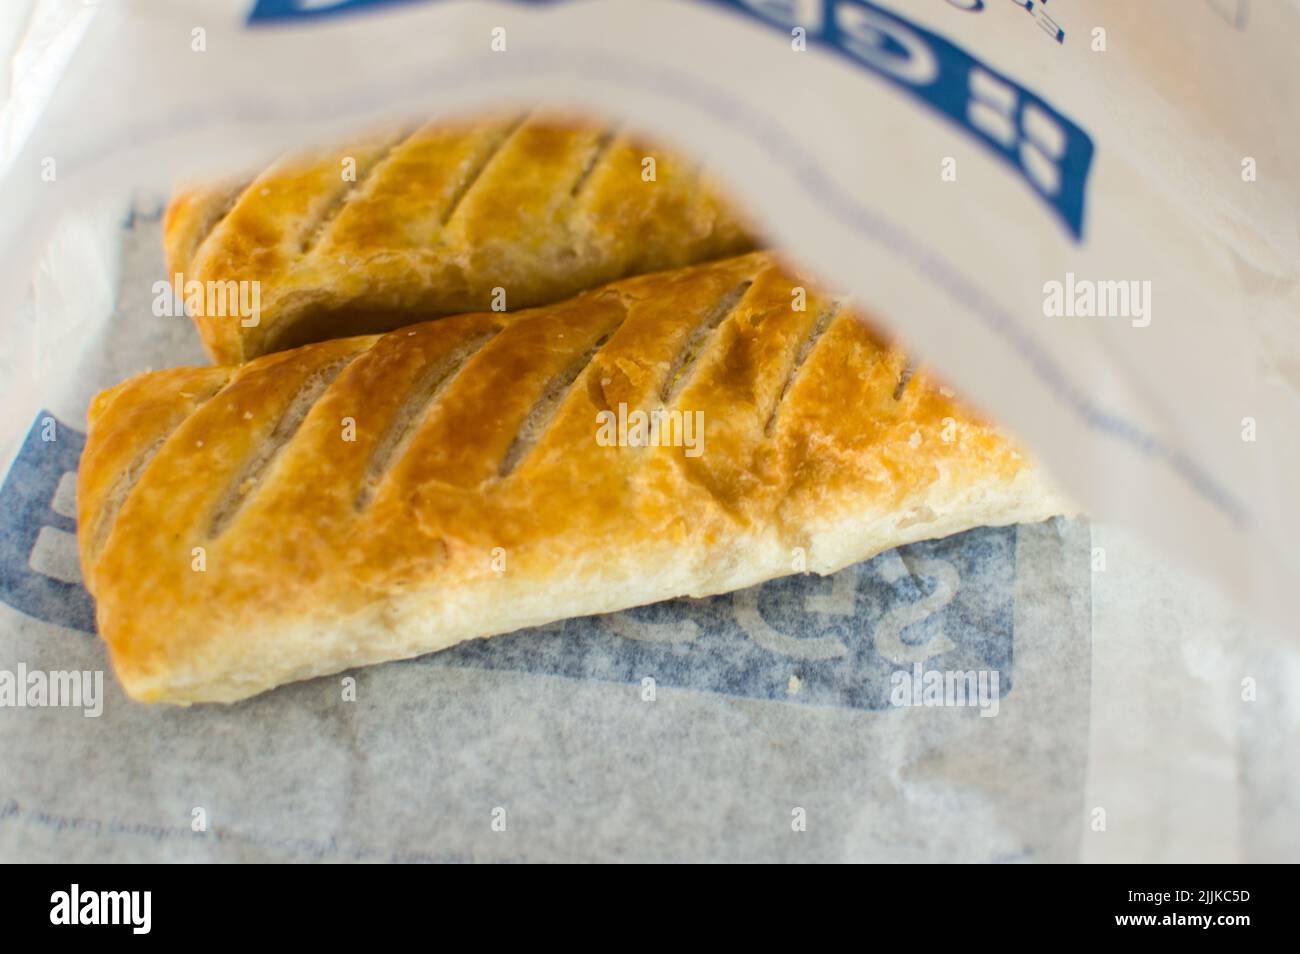 Greggs Sausage roll inside a Greggs printed paper bag Stock Photo